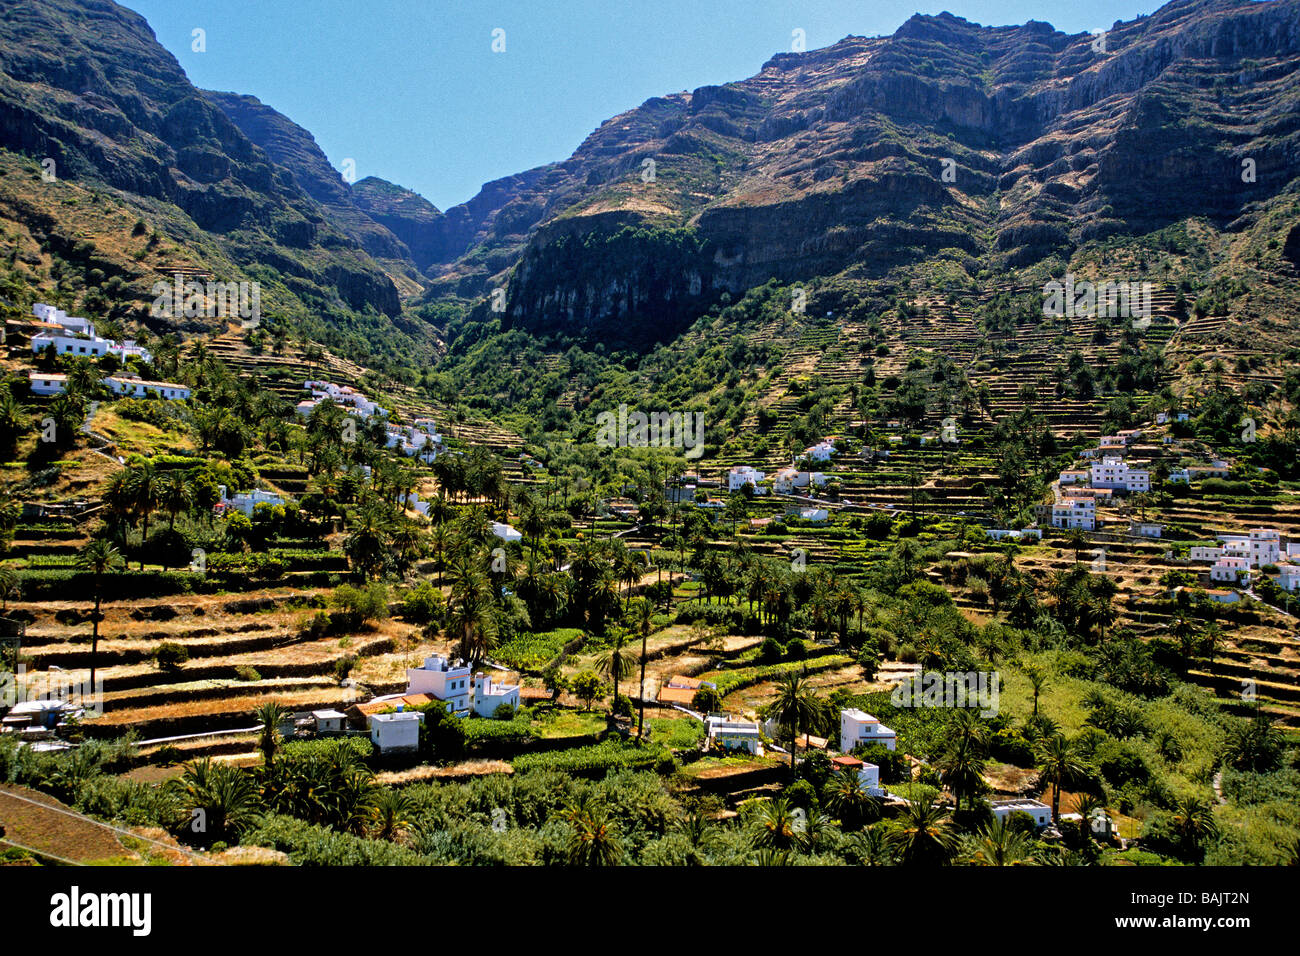 Las Haya High Resolution Stock Photography and Images - Alamy